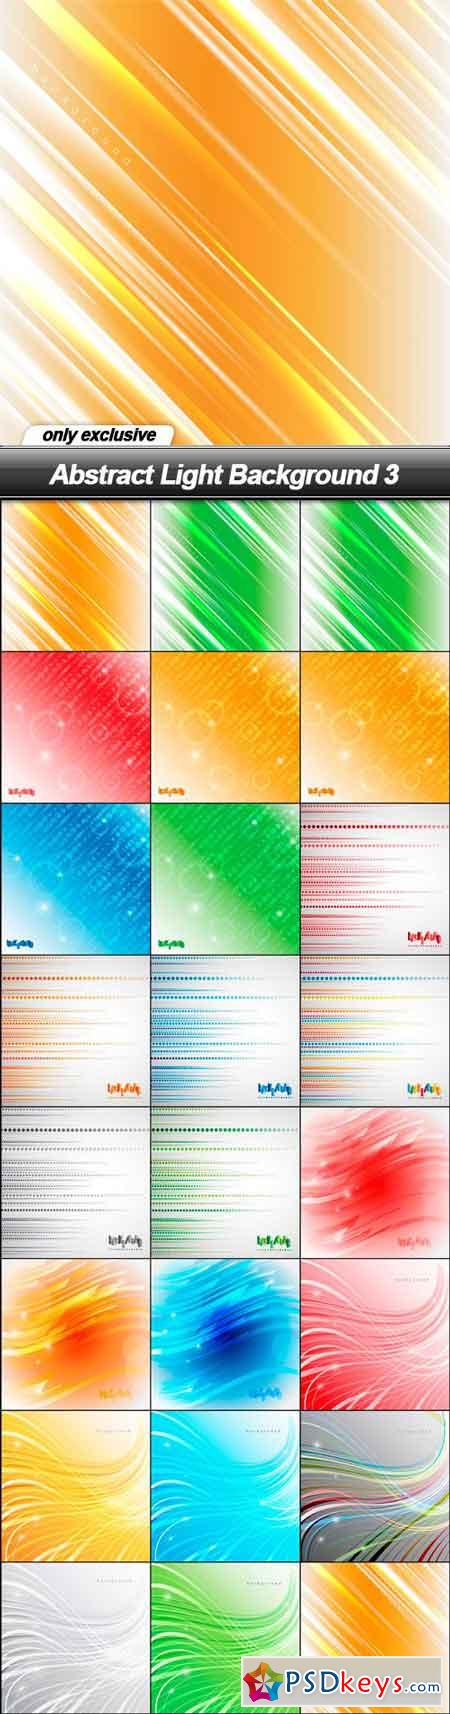 Abstract Light Background 3 - 23 EPS